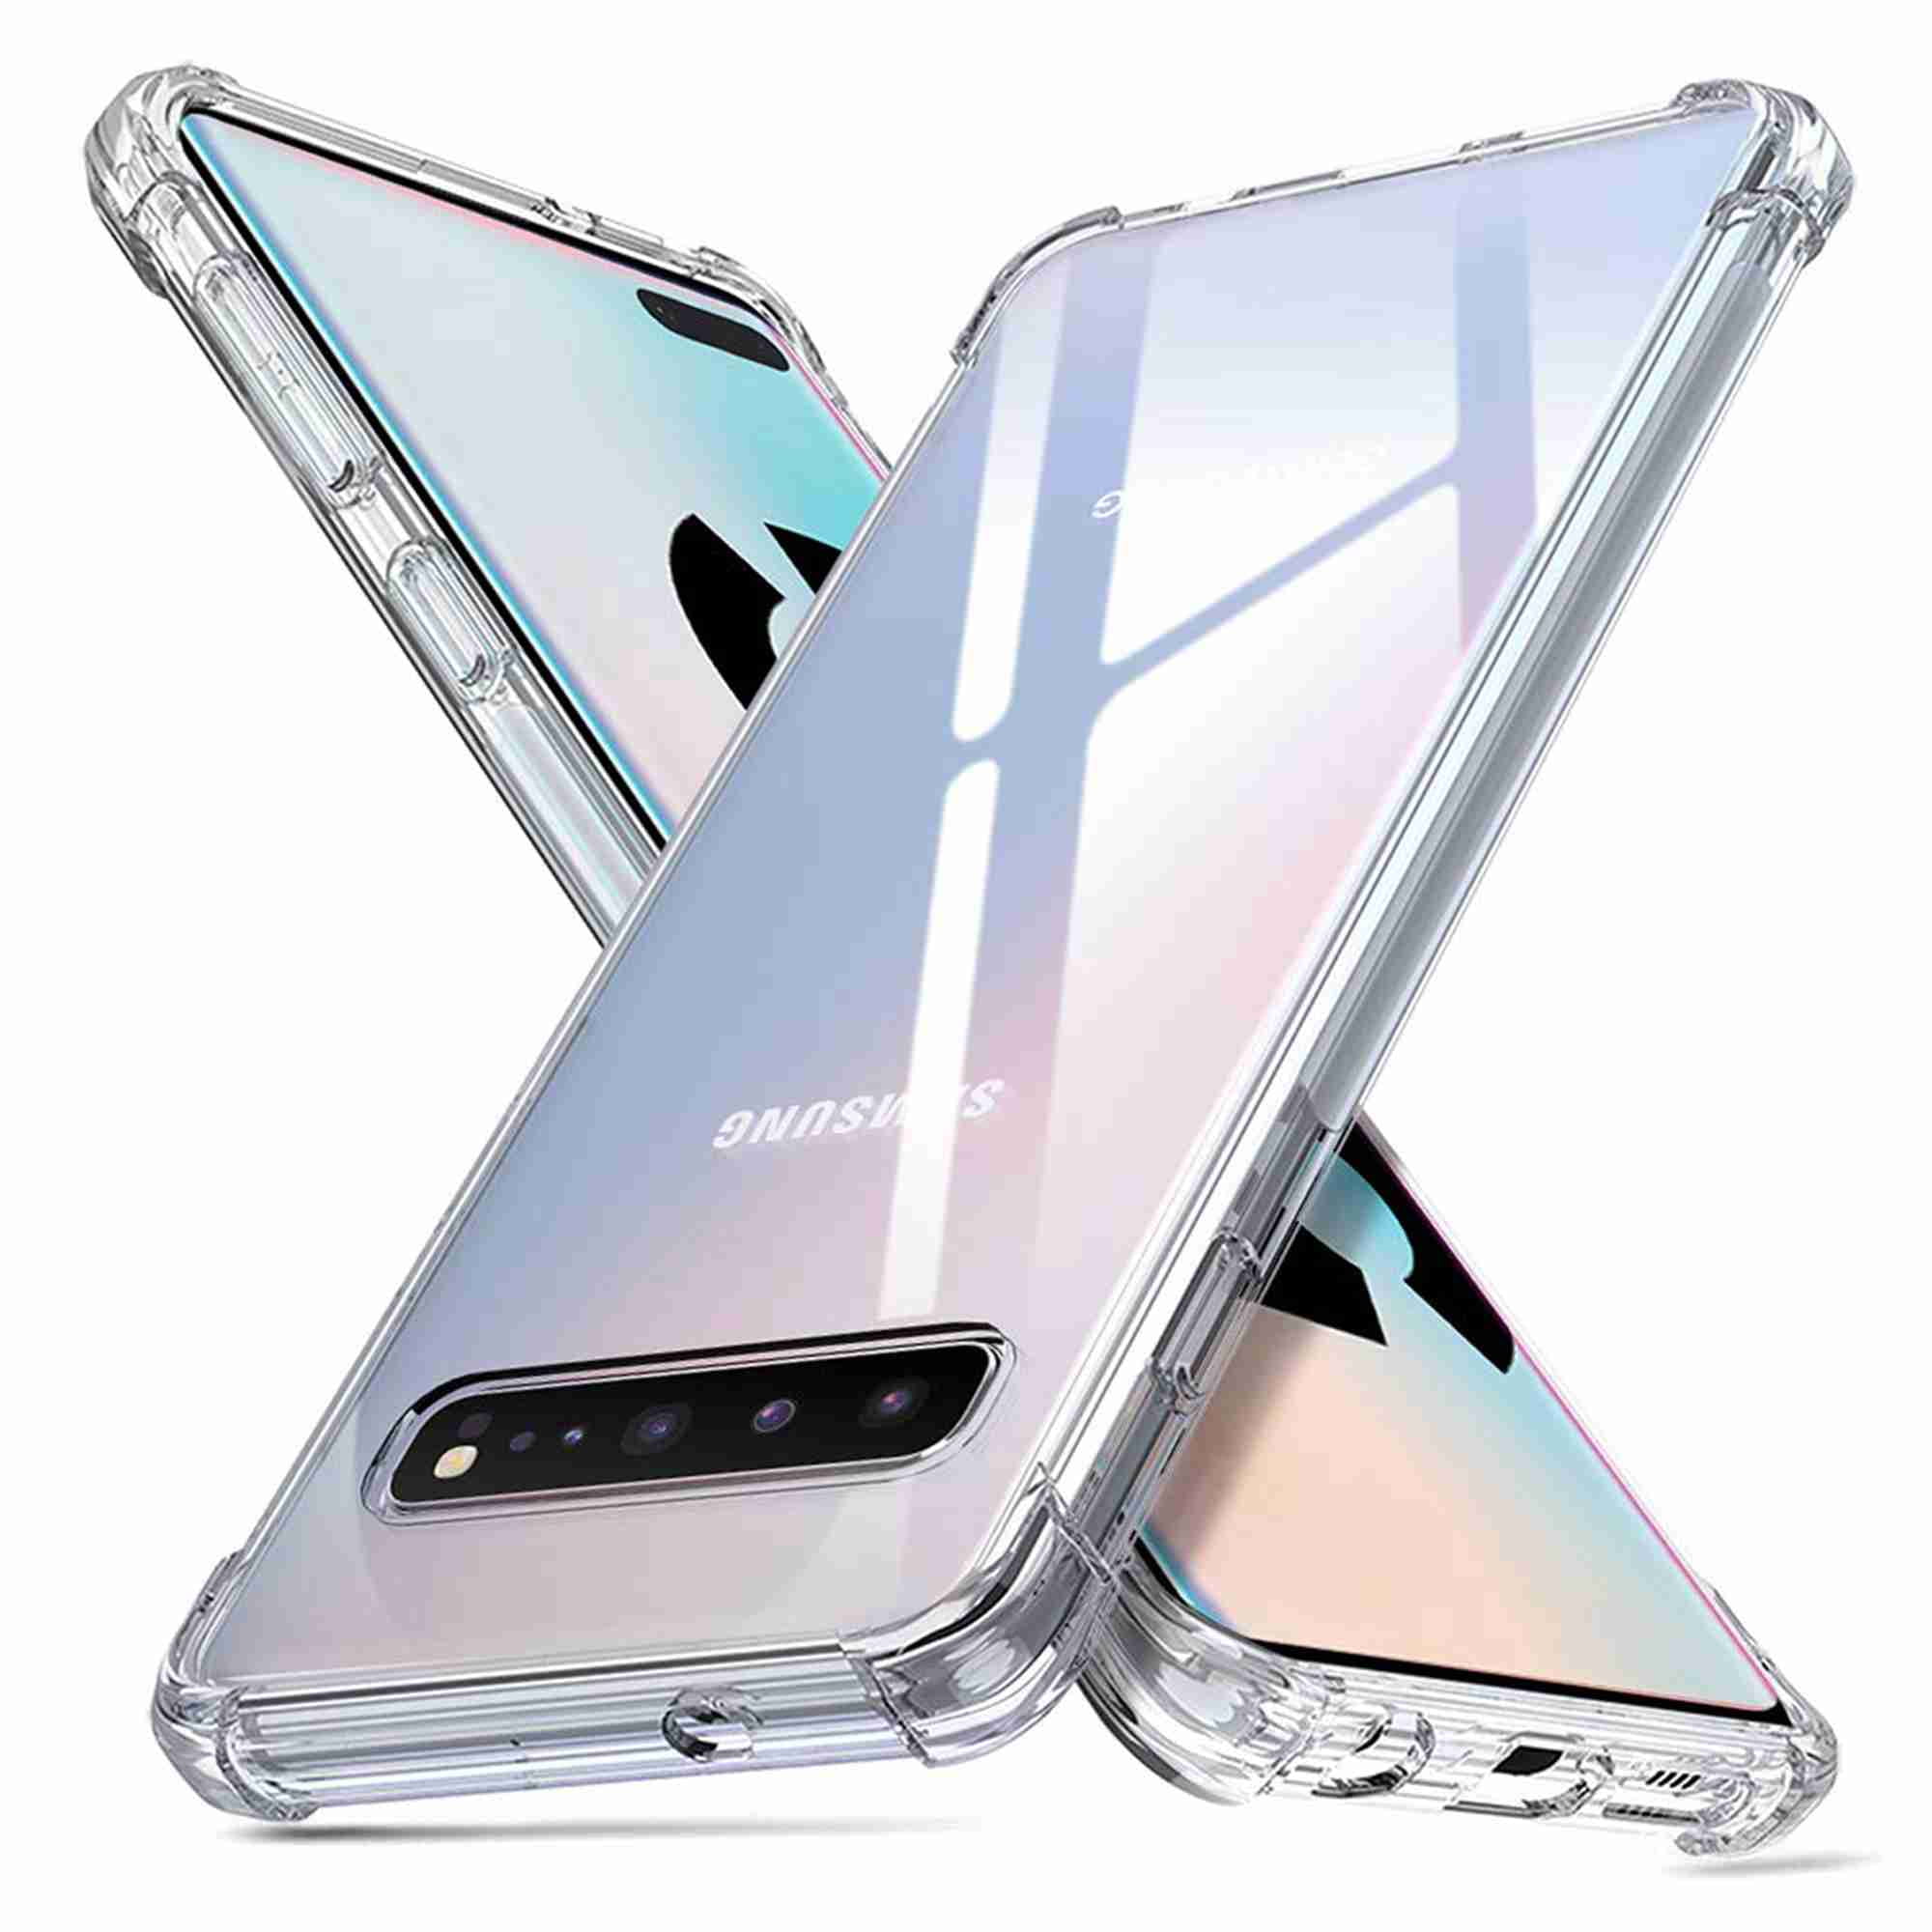 Clear Case for Samsung Galaxy S10 5G, Soft & Flexible TPU Ultra-Thin Shockproof 4 Corners Bumper Transparent Cover, Cases Drop Protection for Samsung Galaxy 5G 6.7 inch(Clear) - Walmart.com